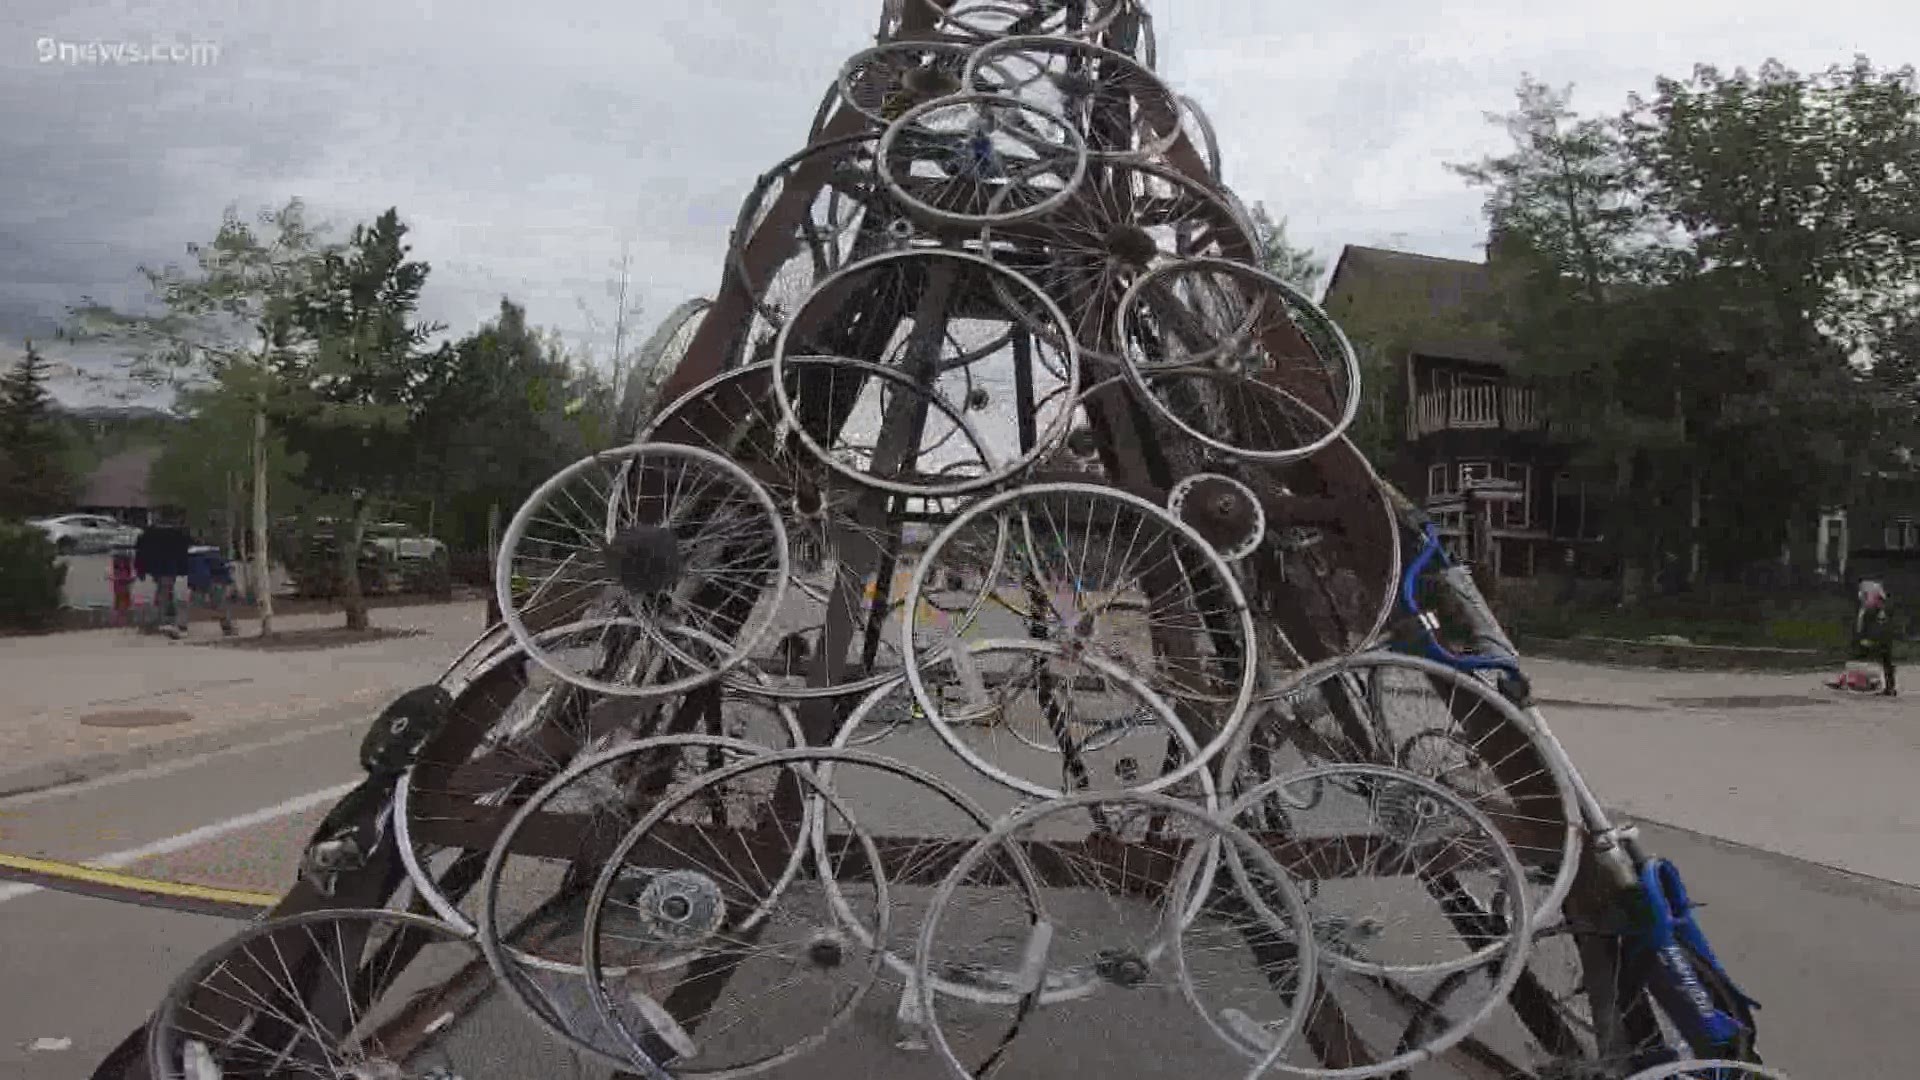 The 30-foot tall Bikeful Tower is made from hundreds of bike parts and is normally on display during big bike races.